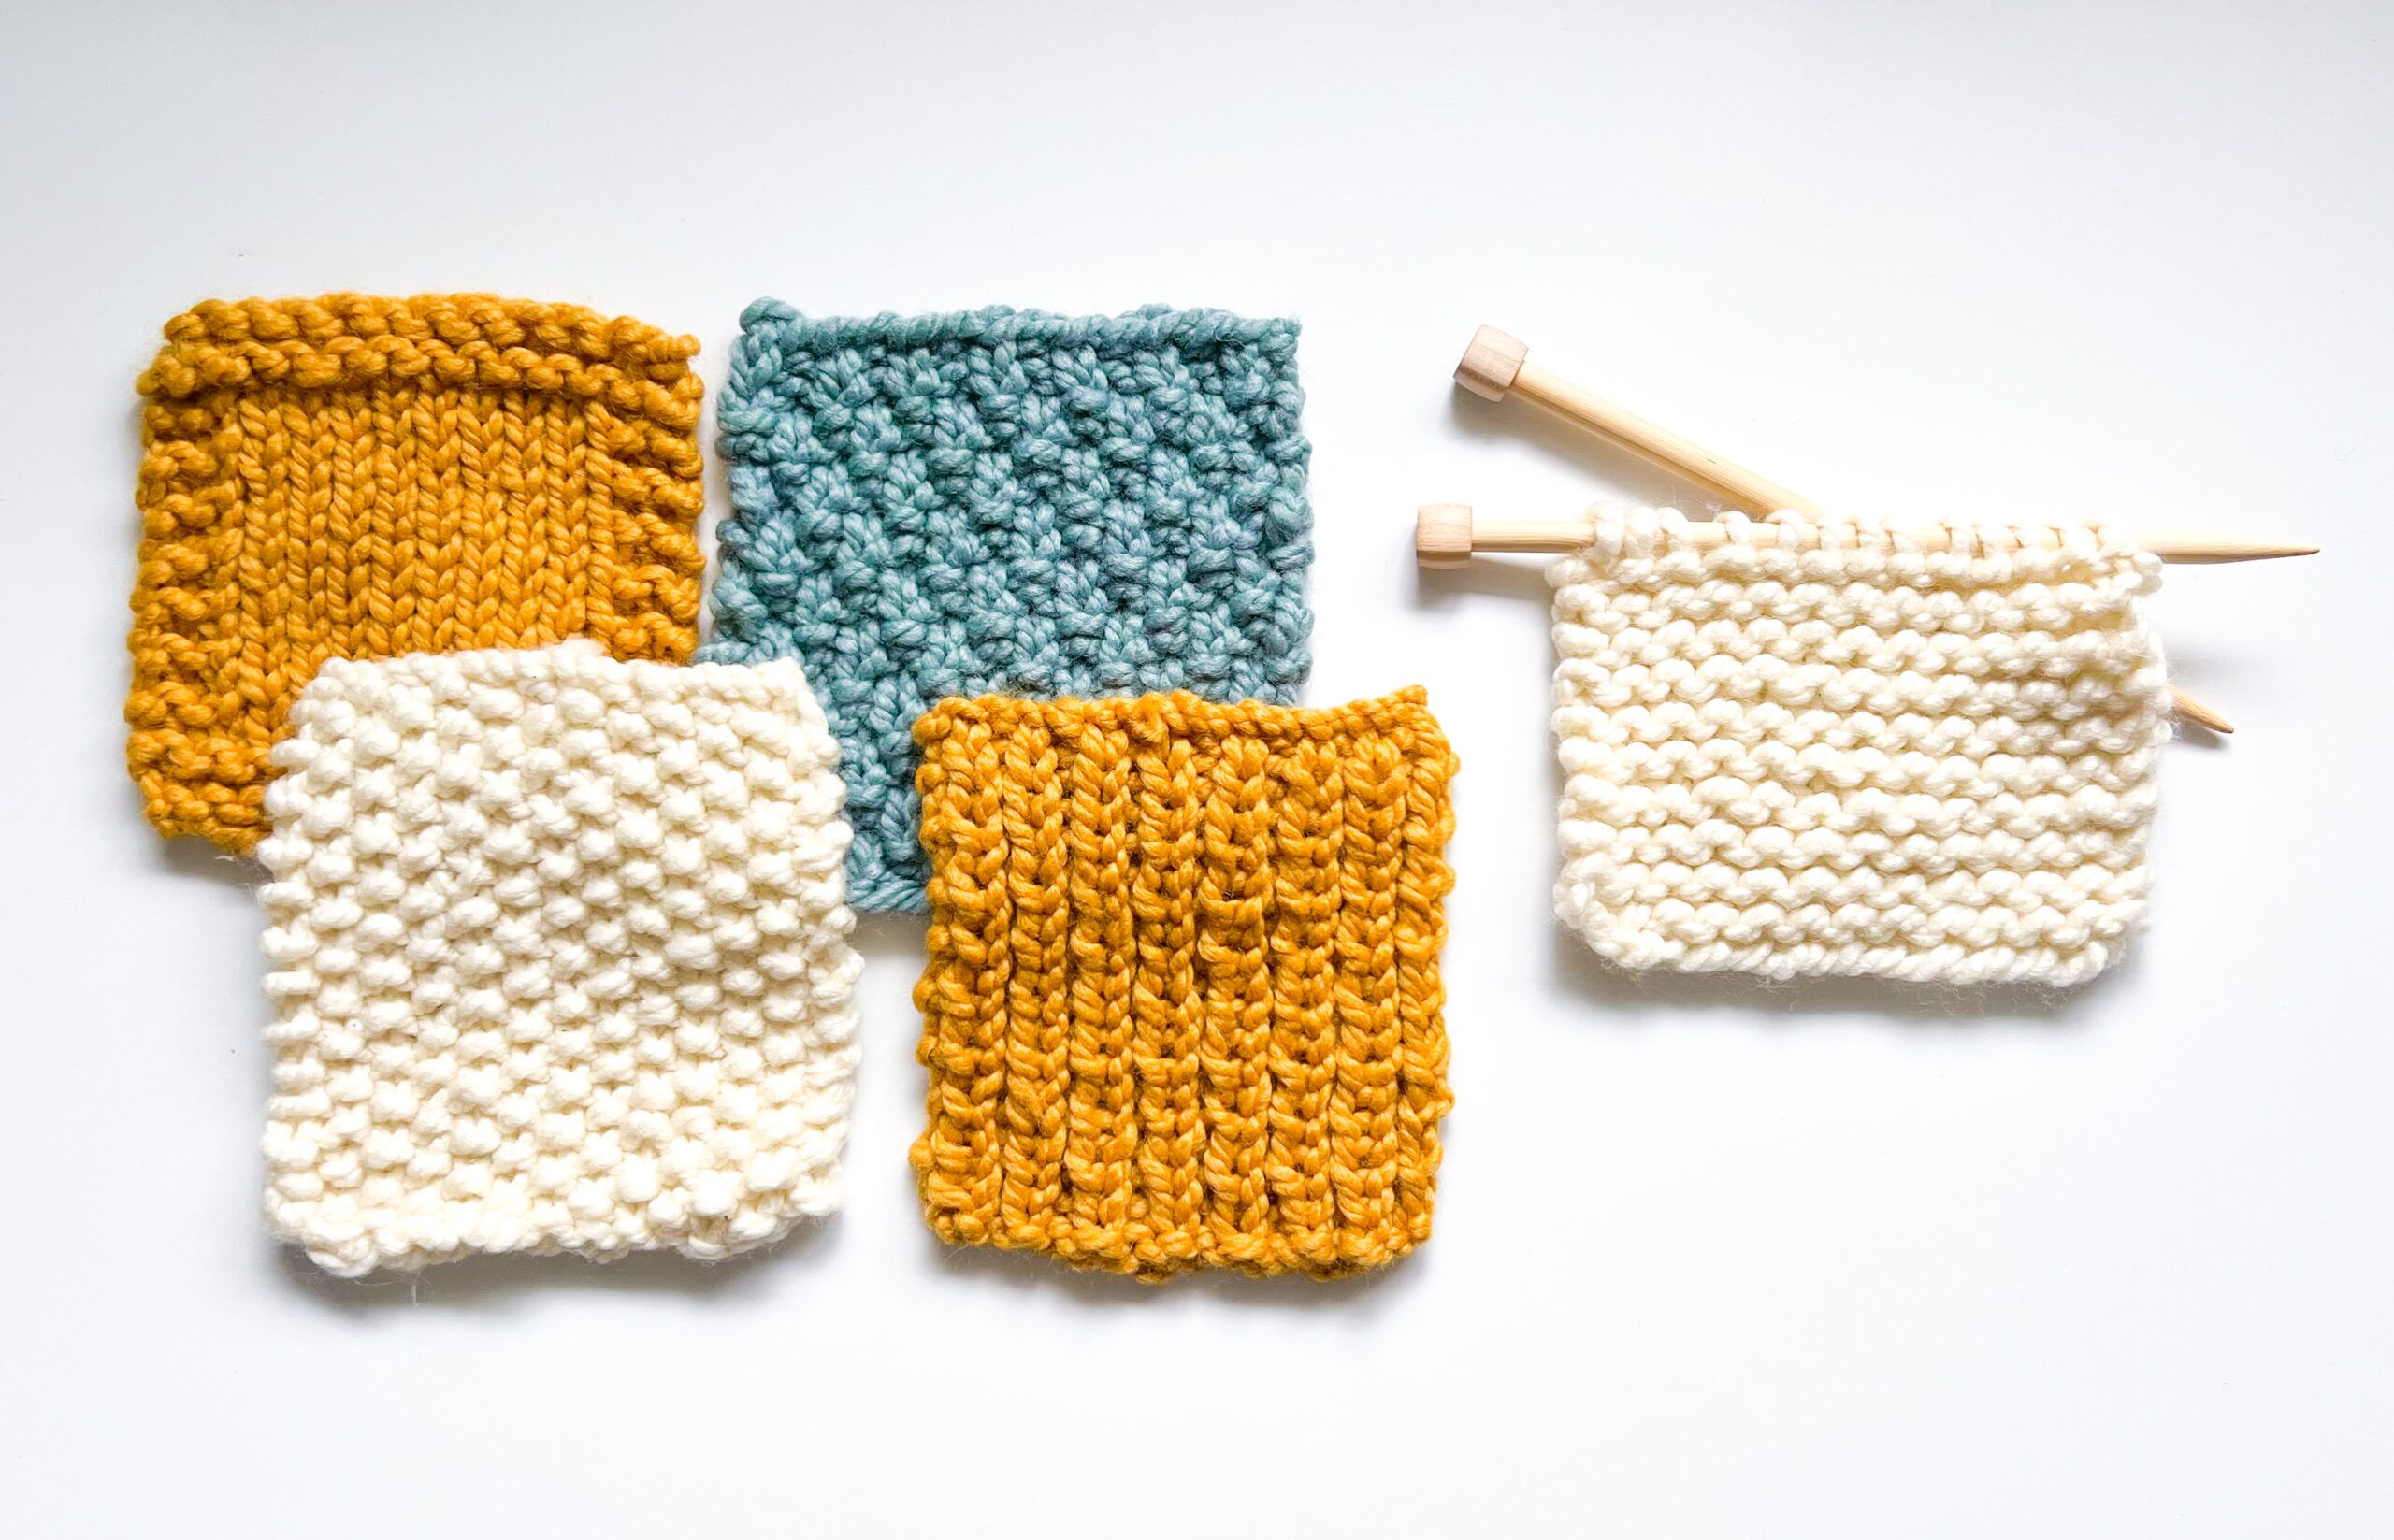 Knitting Stitches for Beginners [5 Easy Patterns]